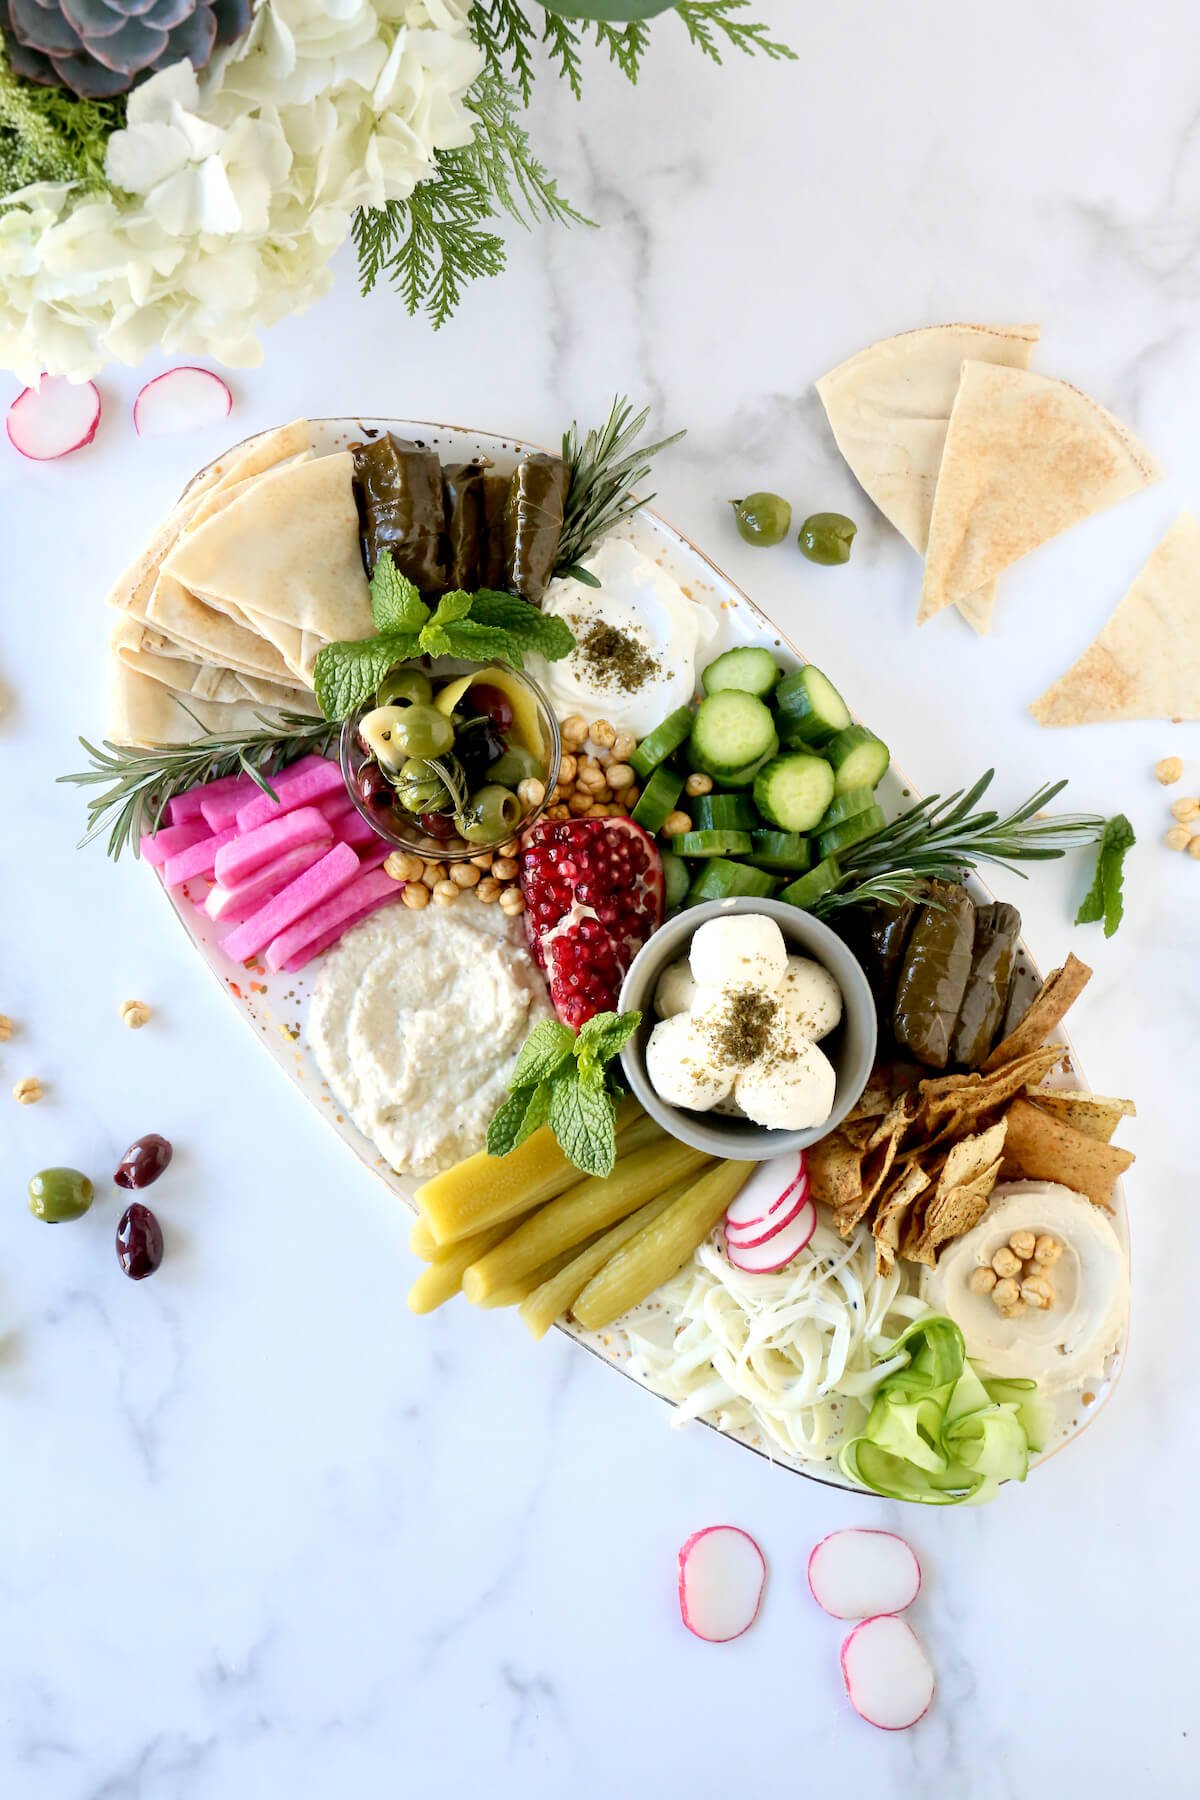 A large platter filled with grape leaves, pickles, hummus, penne, bread, cheese and herbs.